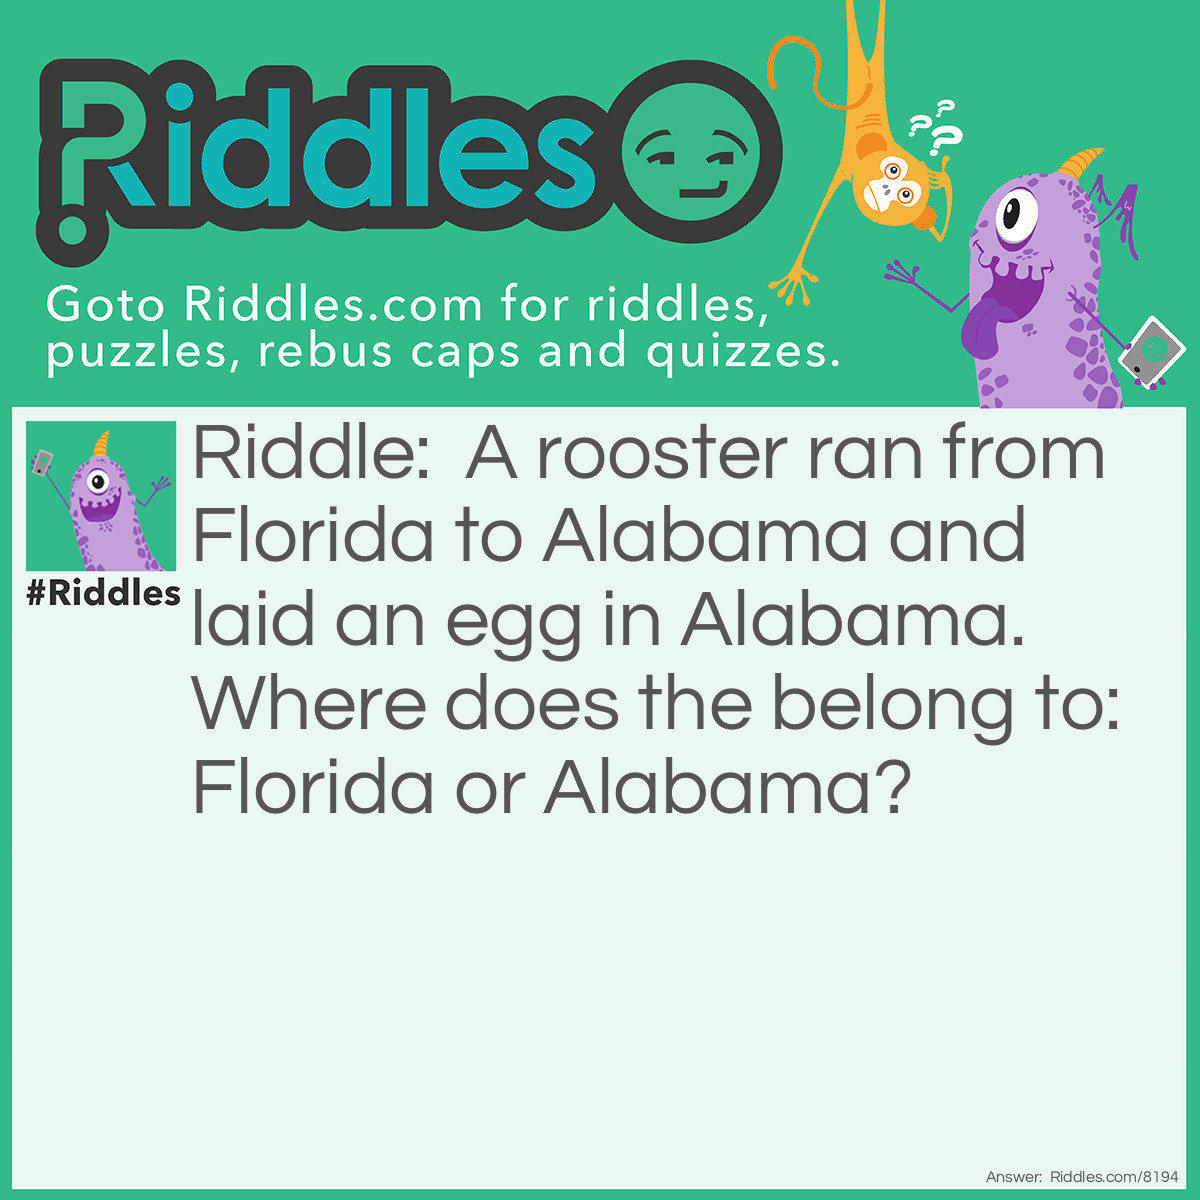 Riddle: A rooster ran from Florida to Alabama and laid an egg in Alabama. Where does the belong to: Florida or Alabama? Answer: Neither! Roosters don't lay eggs!